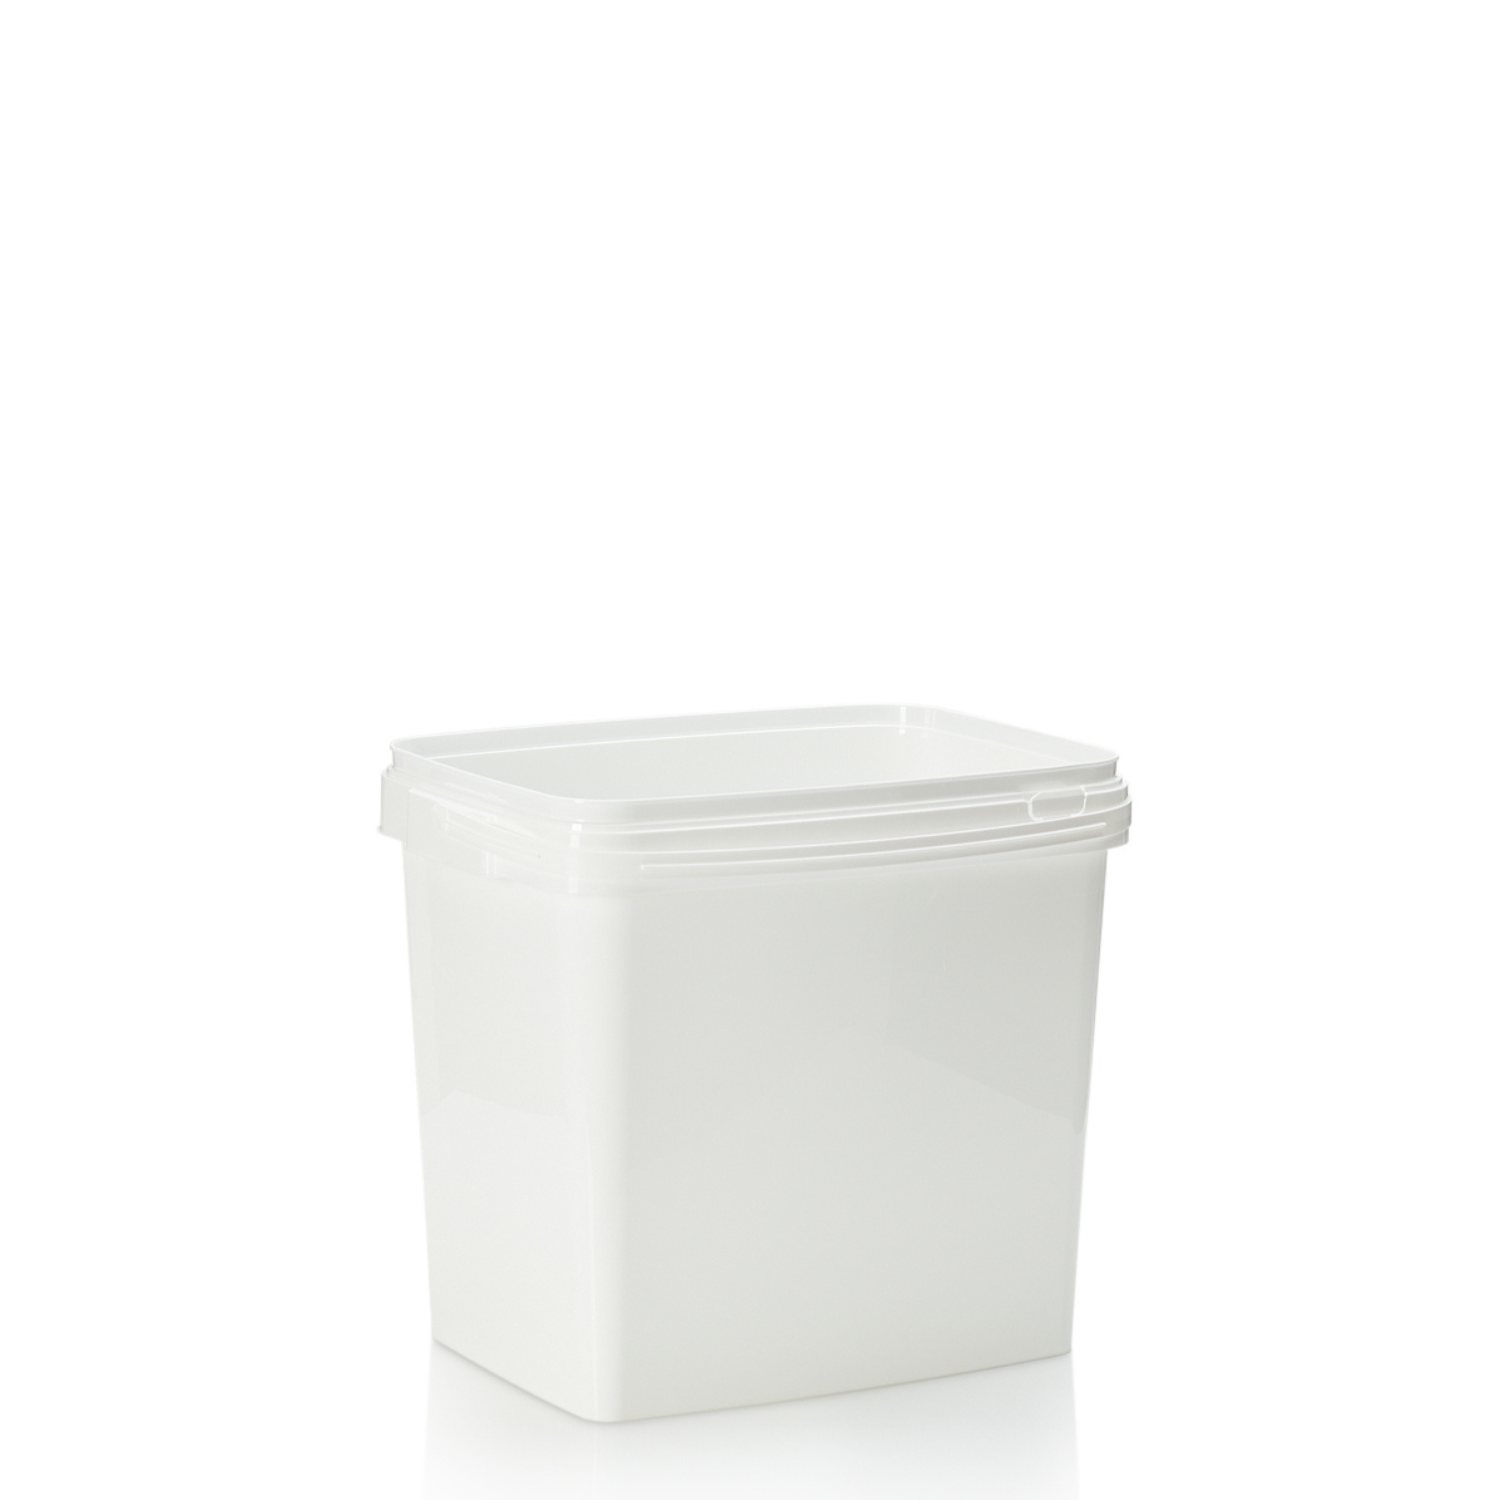 25ltr White PP Rectangular Tamper Evident Pail with Plastic Handle